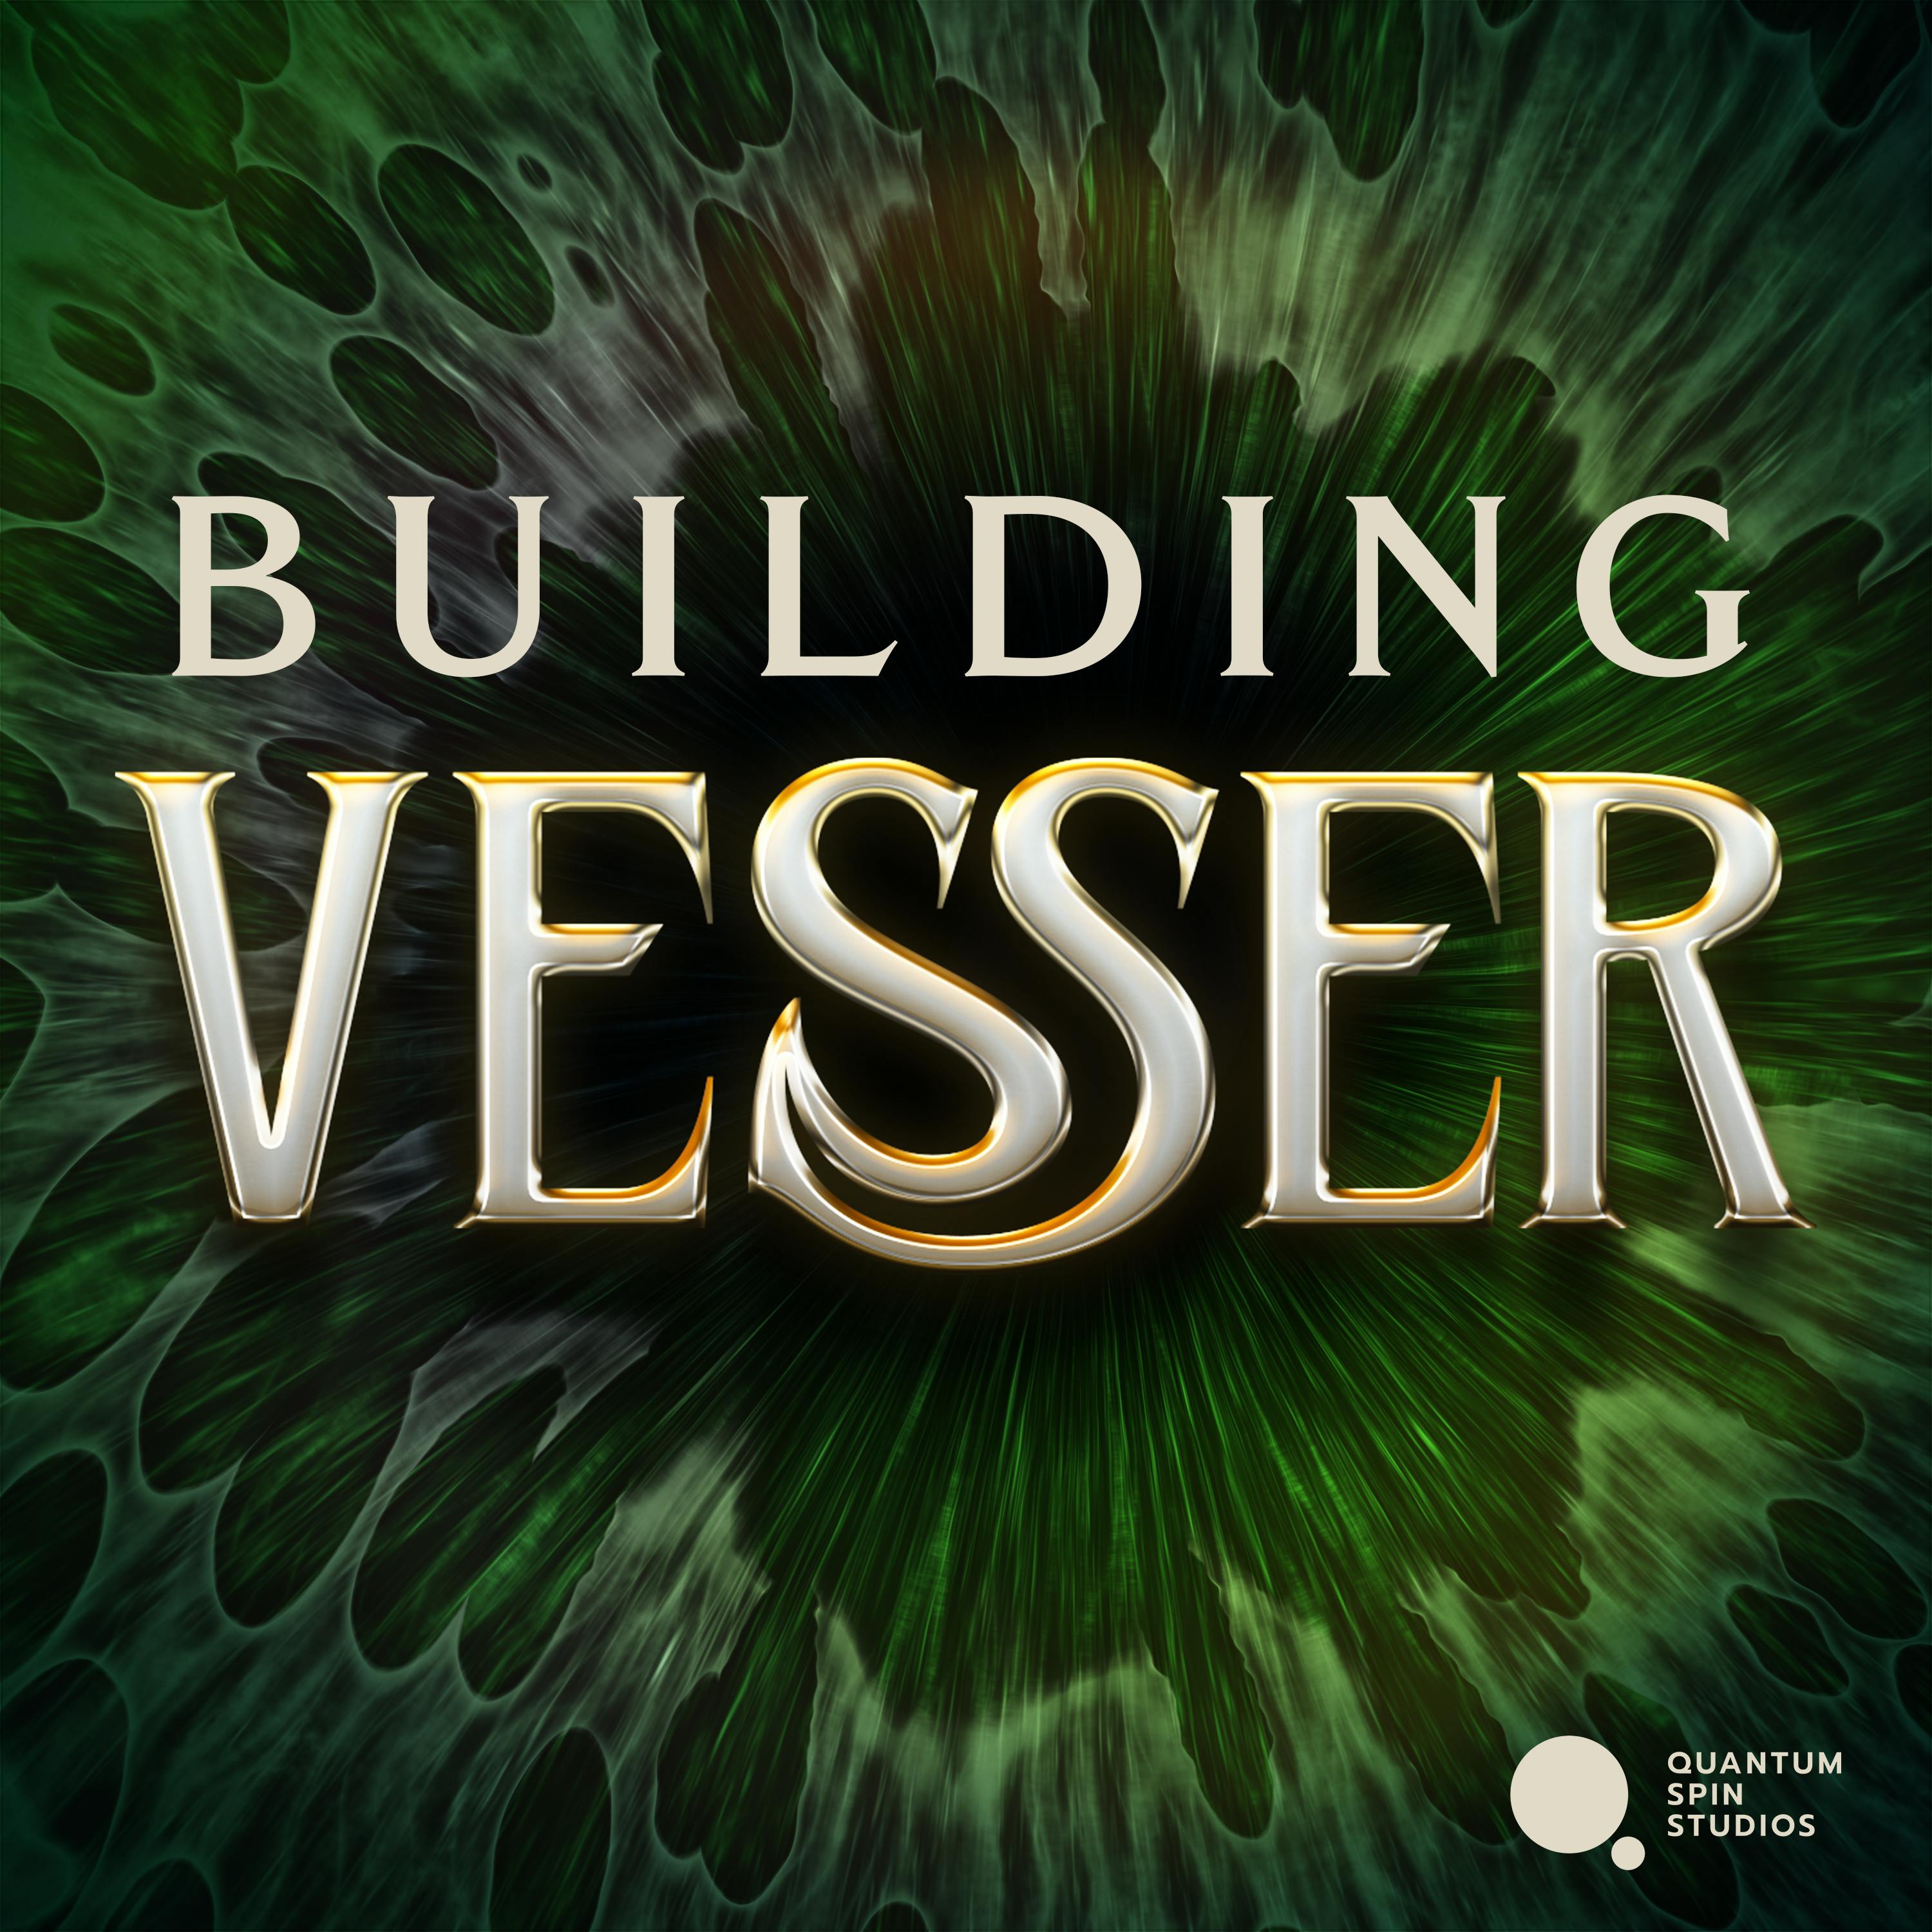 Building Vesser: Technology on Vesser, Narrative Direction, and Continuity